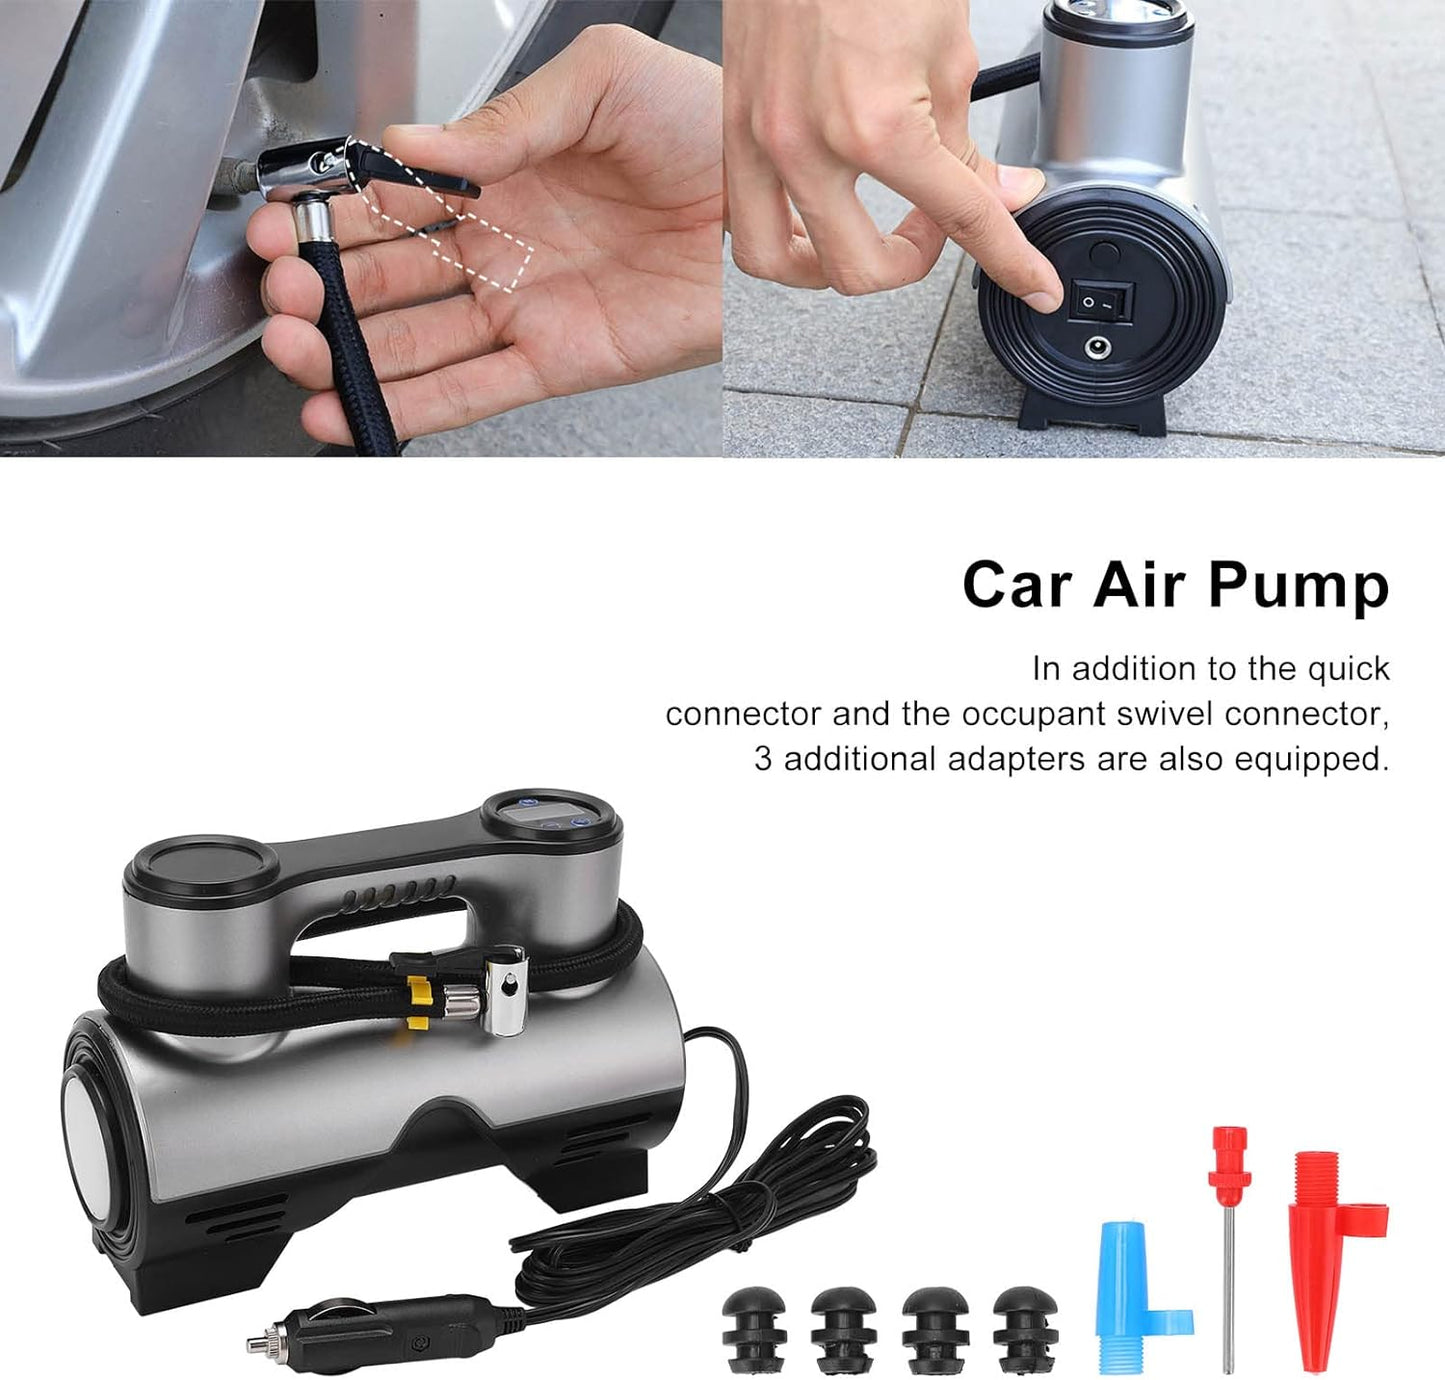 Car Tire Inflator - 12V 120W Electric Air Pump, 150PSI 35L/Min, Real Time Display, Bright Flashlight, Portable Auto Tire Pump Air Compressor for Cars Tires, Bicycles Tires, Balls